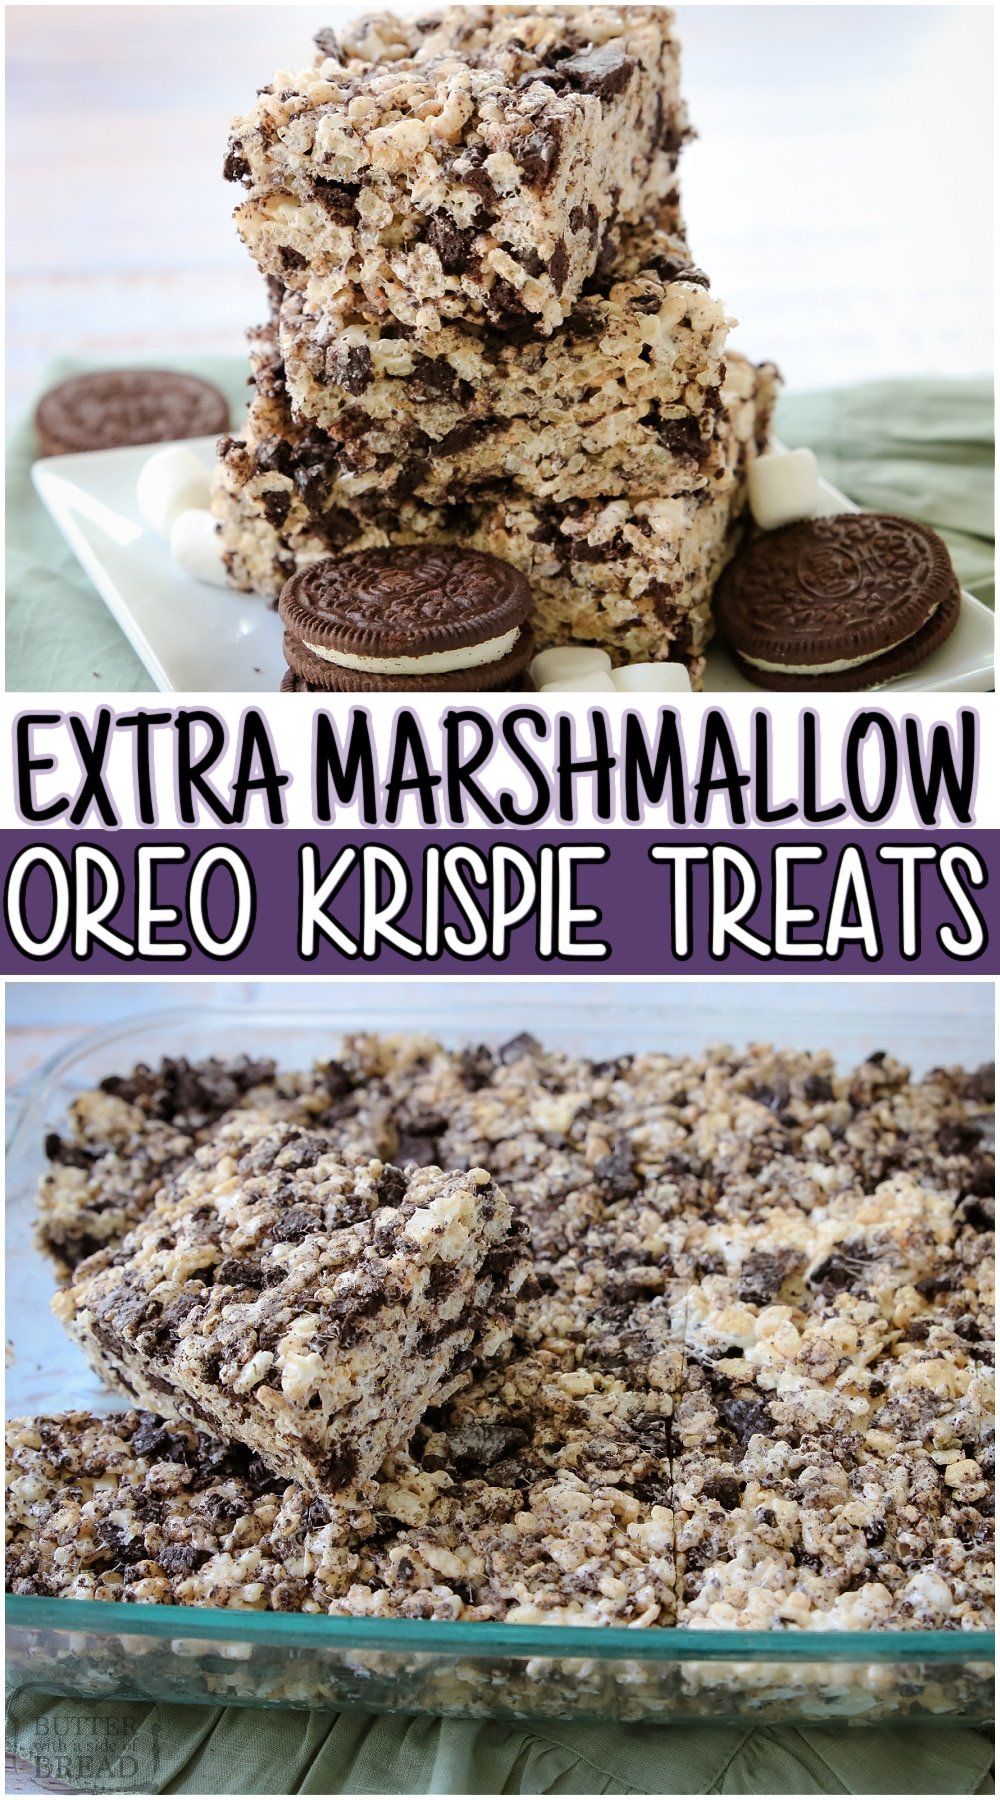 Oreo Krispie Treats are two favorites combined into one tasty marshmallow dessert! Cookies and Cream Rice Krispie Treats are soft & chewy with tons of marshmallows and crushed OREO cookies! #OREO #KRISPIES #Marshmallows #dessert #nobake #easyrecipe from BUTTER WITH A SIDE OF BREAD